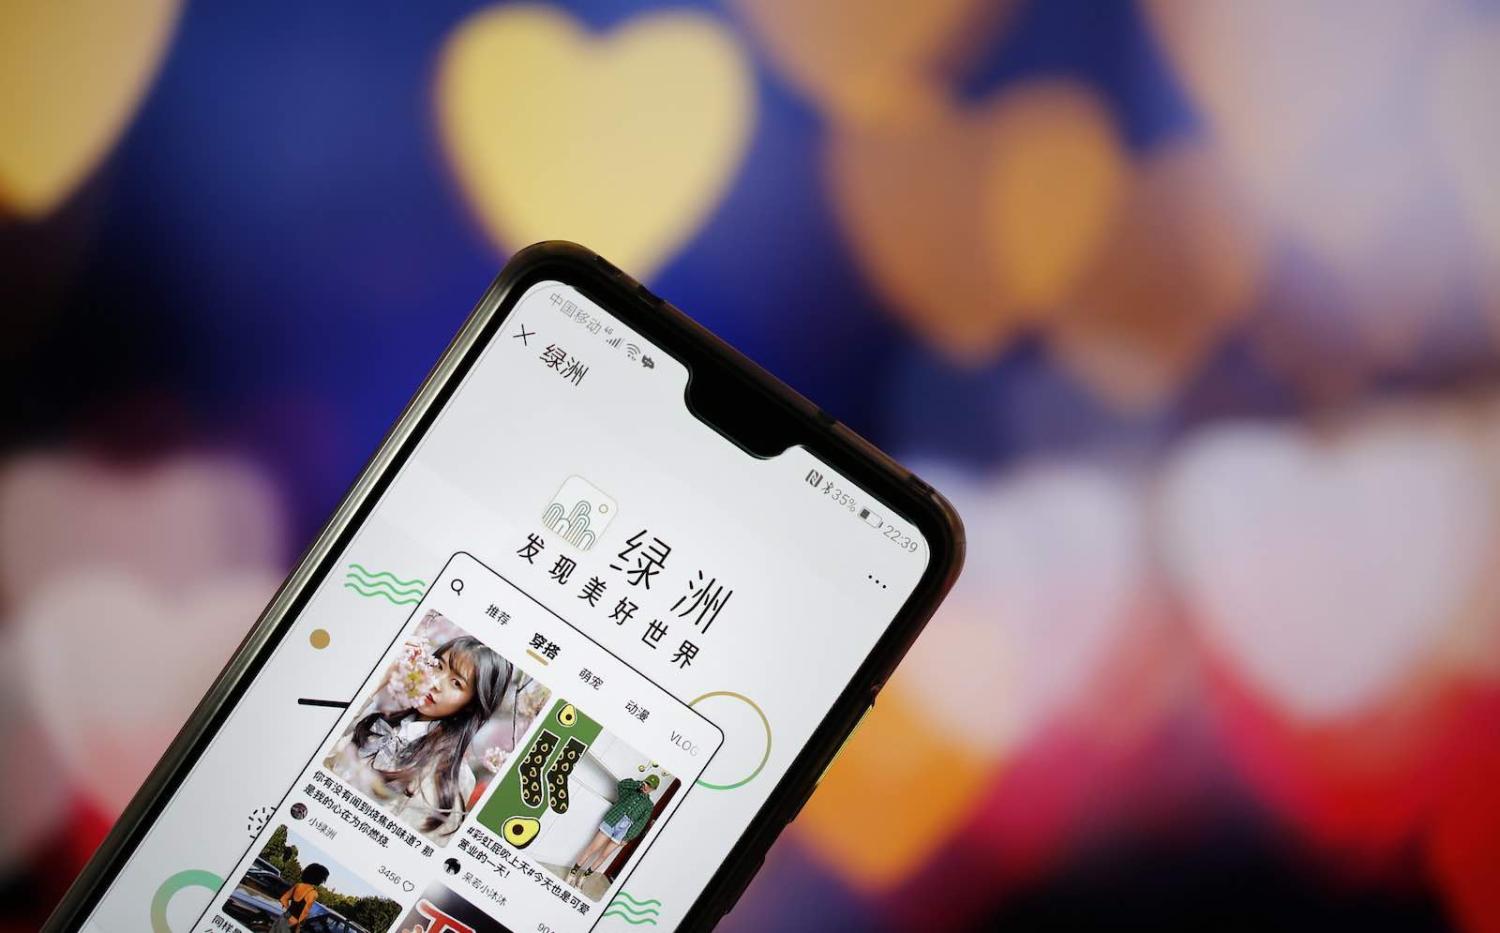 Sina Weibo’s recently launched “Instagram clone” social media platform Oasis (Photo: VCG via Getty Images)